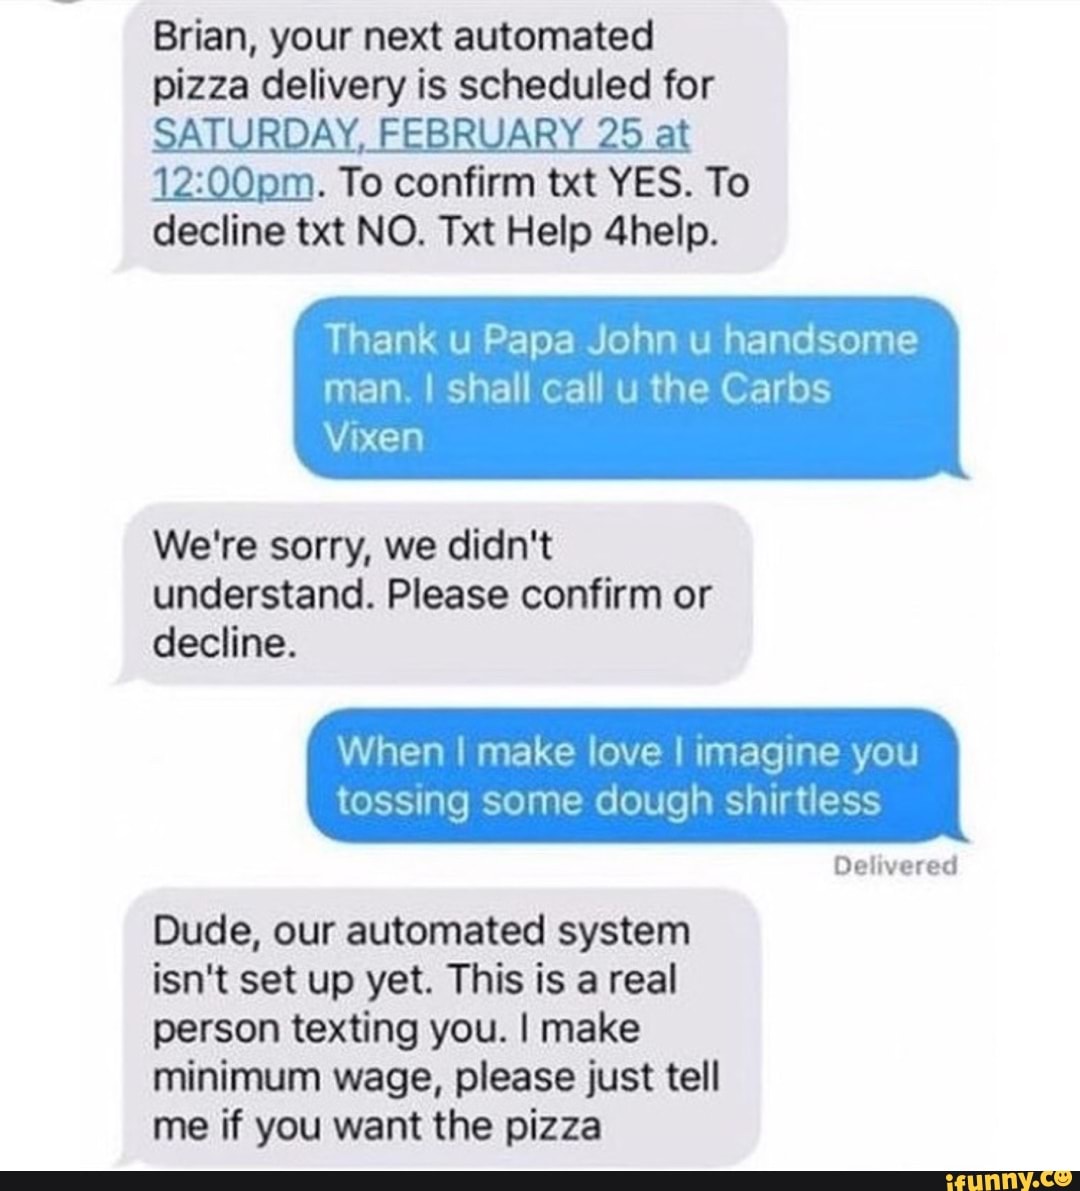 Brian Your Next Automated Pizza Delivery Is Scheduled For W 12 1mm To Confirm Txt Yes To Decline Txt No Txt Help 4help Thank U Papa John U Handsome Man I Shall Call